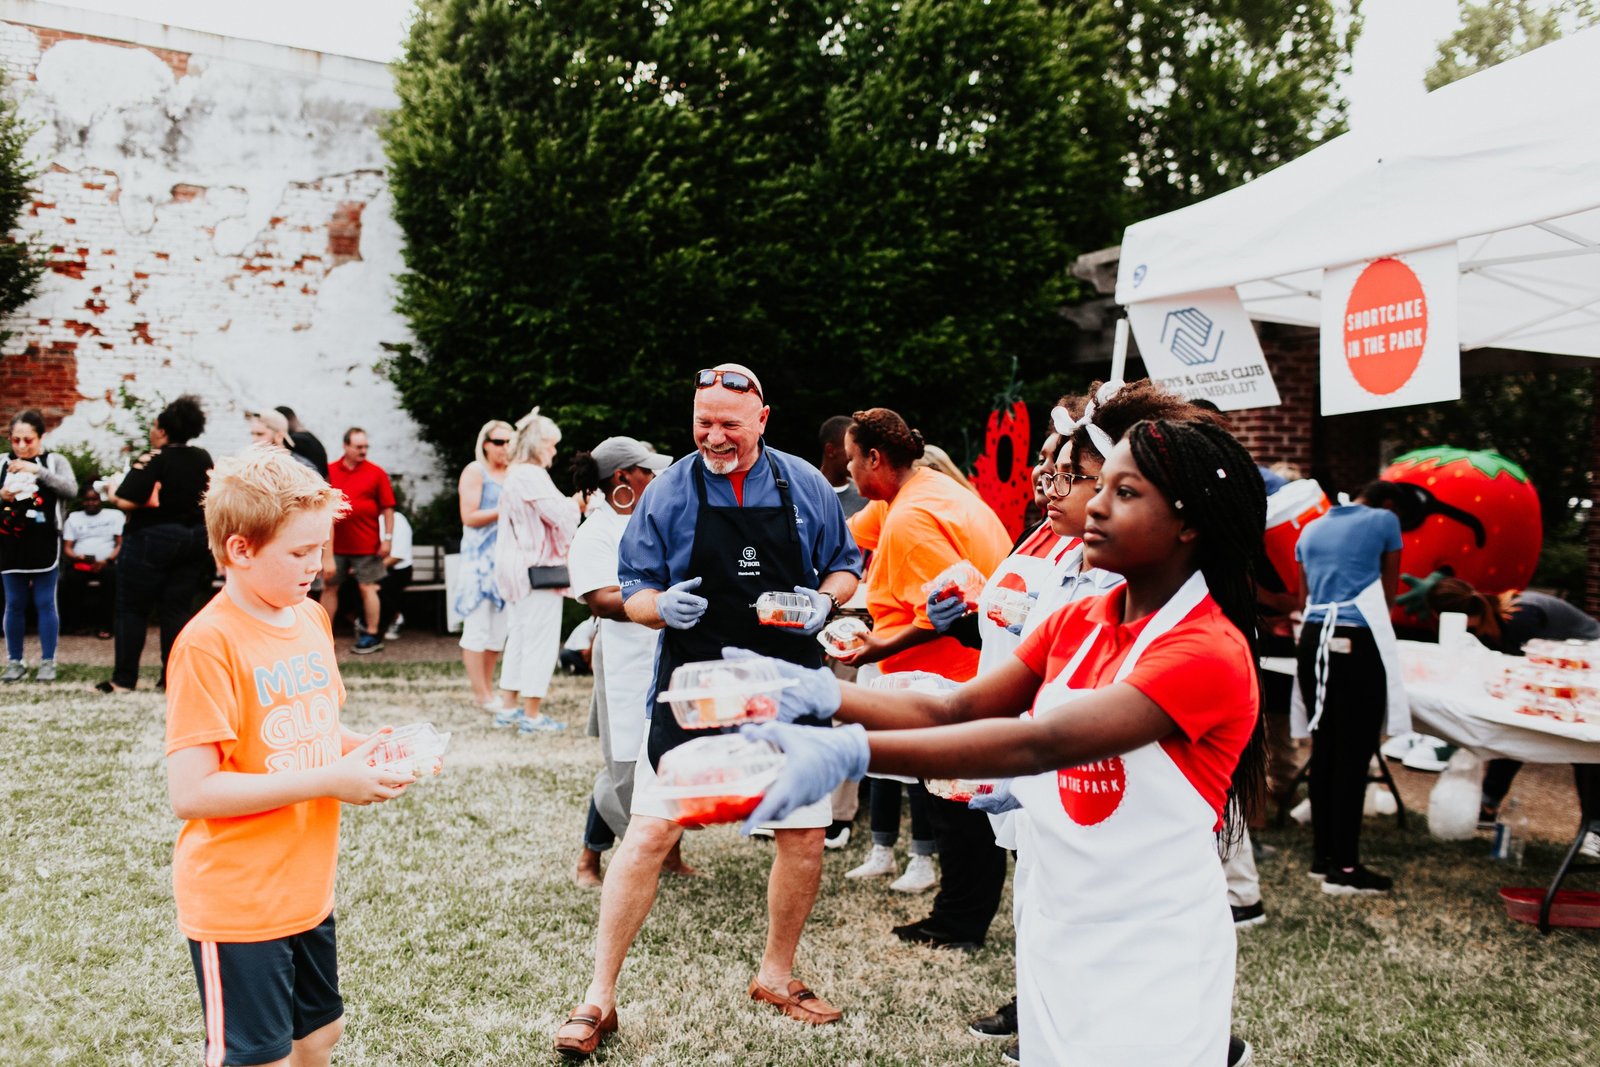 2019 West Tennessee Strawberry Festival - Shortcake in the park - 7